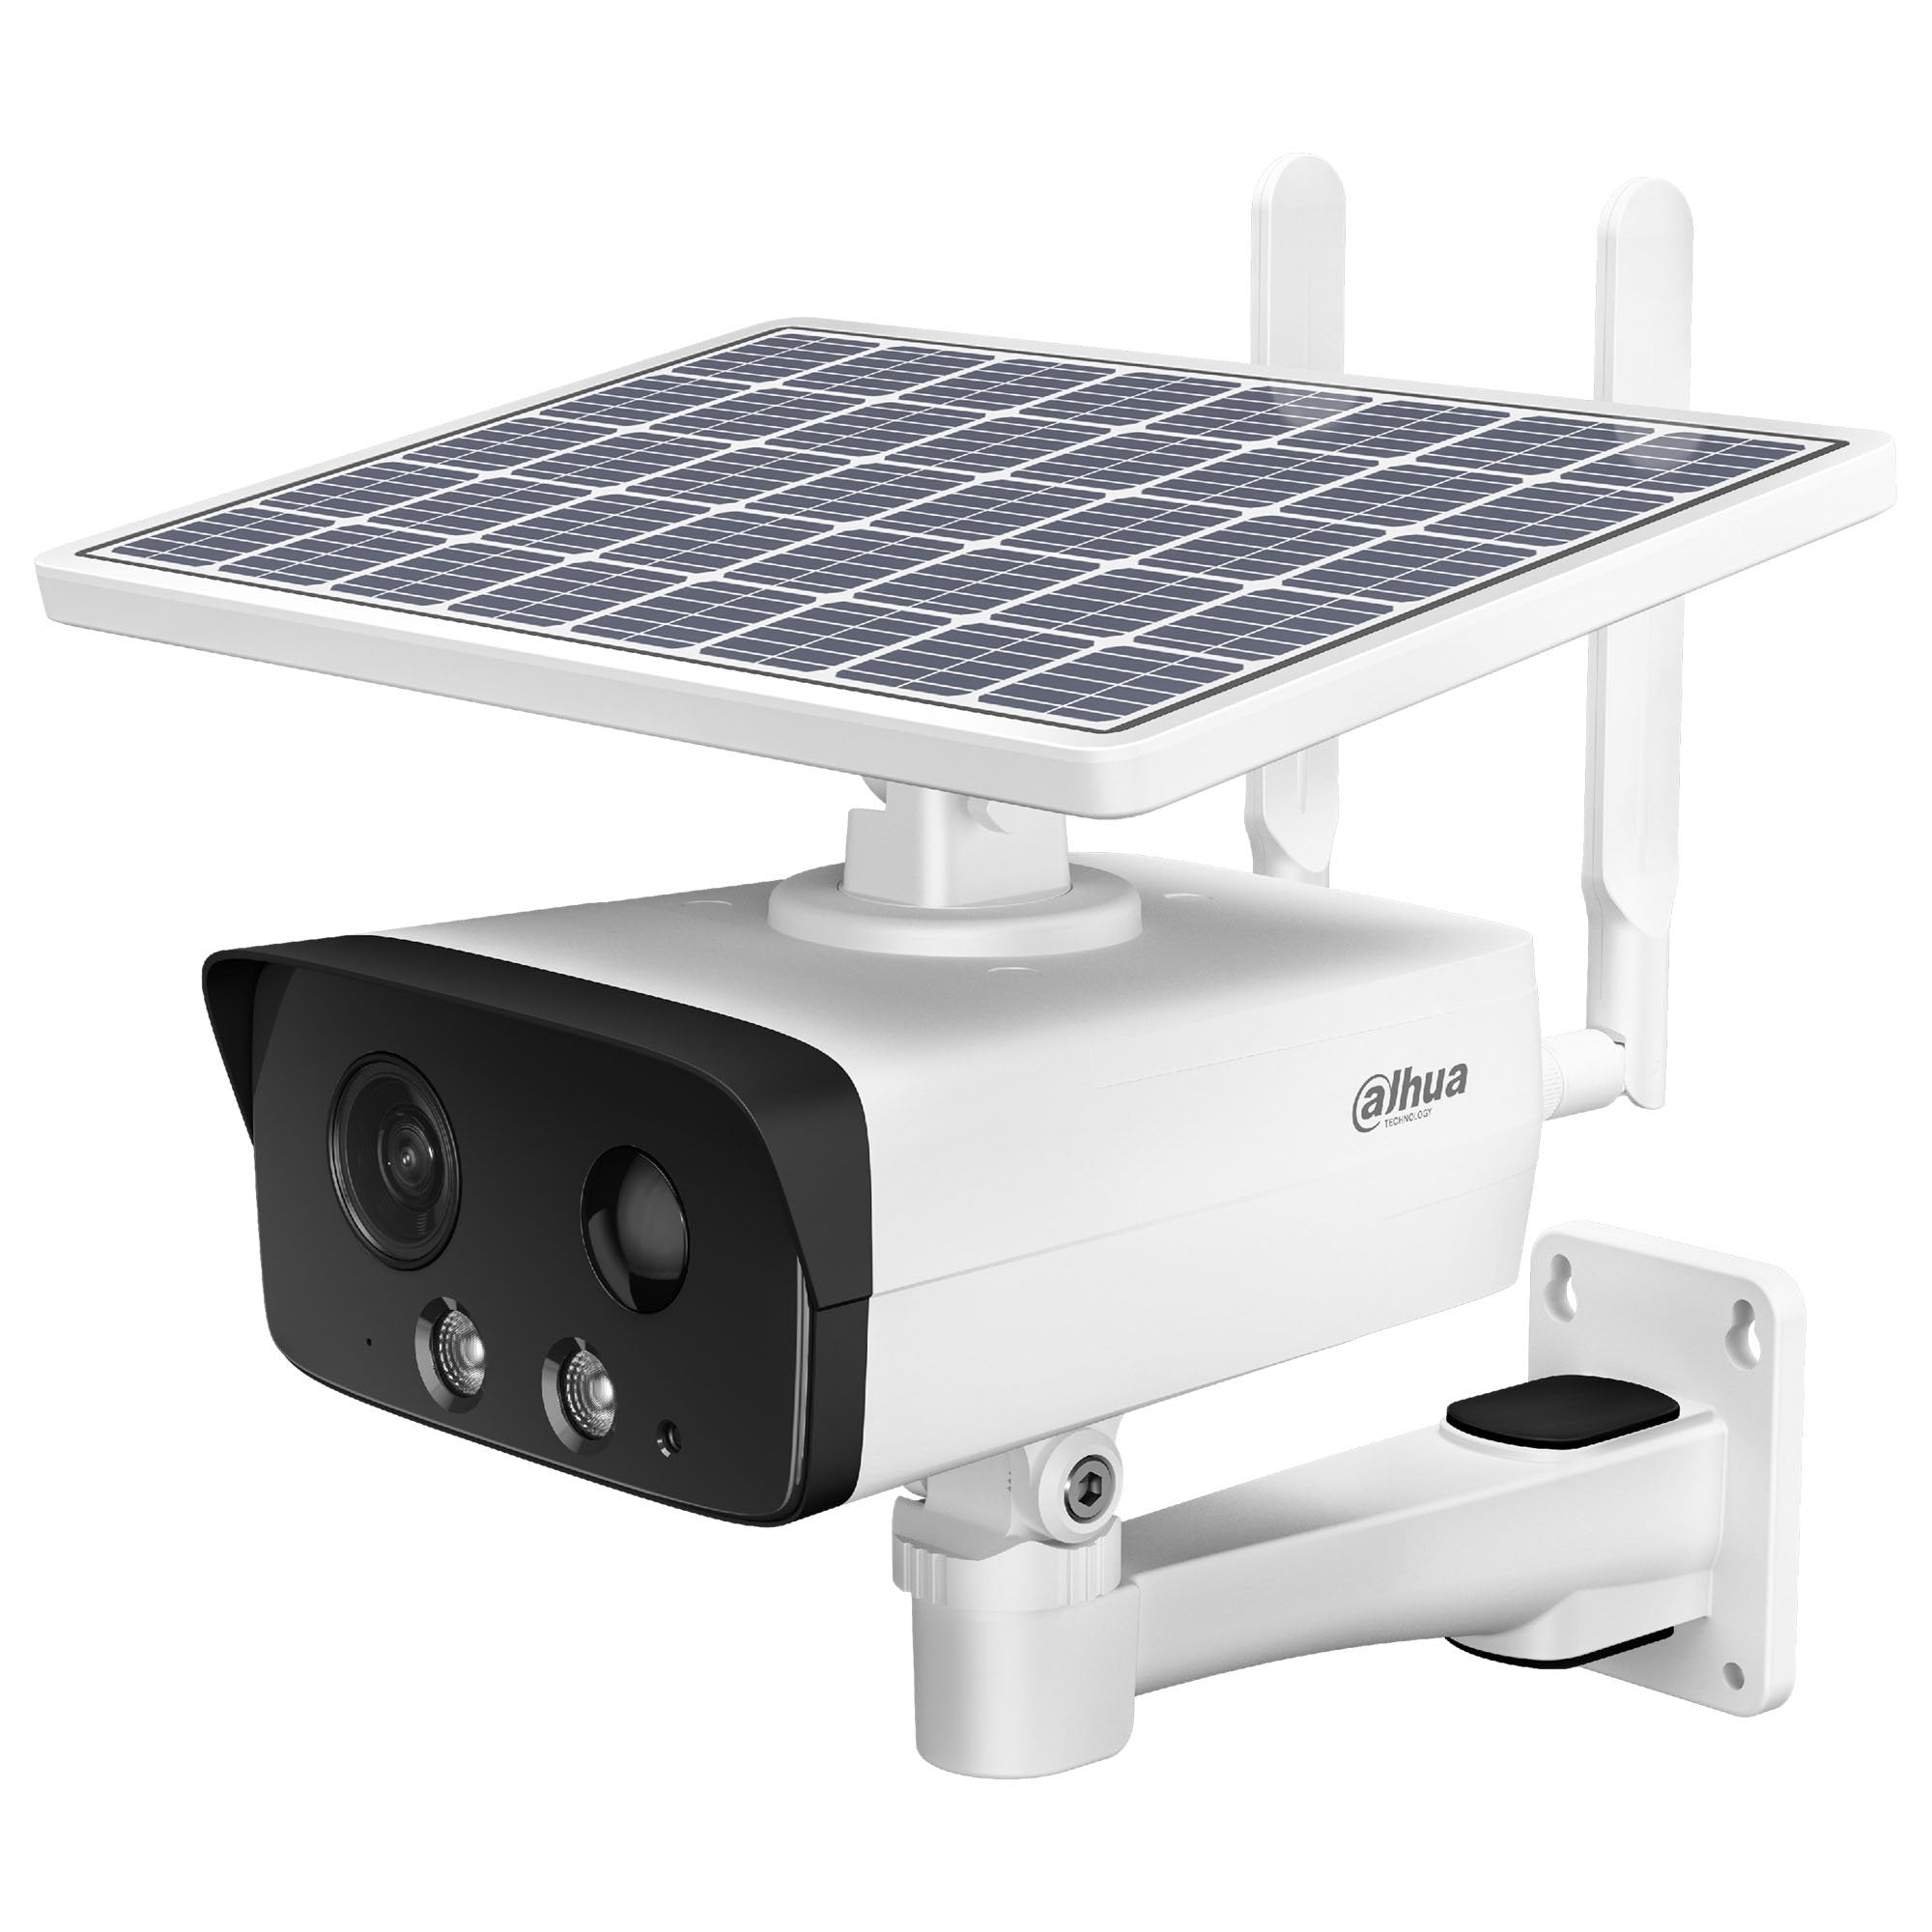 Dahua 4MP IP Lite Series, Solar 4G Bullet Camera, 2.8mm, 120dB WDR, 50m IR / 30m White Light, IP67, MicroSD, Built-In 8GB Memory / PIR / Mic / Speaker, Lasts Up To 10 Days With 1Hr View / Day (Junction Box: PFA121)